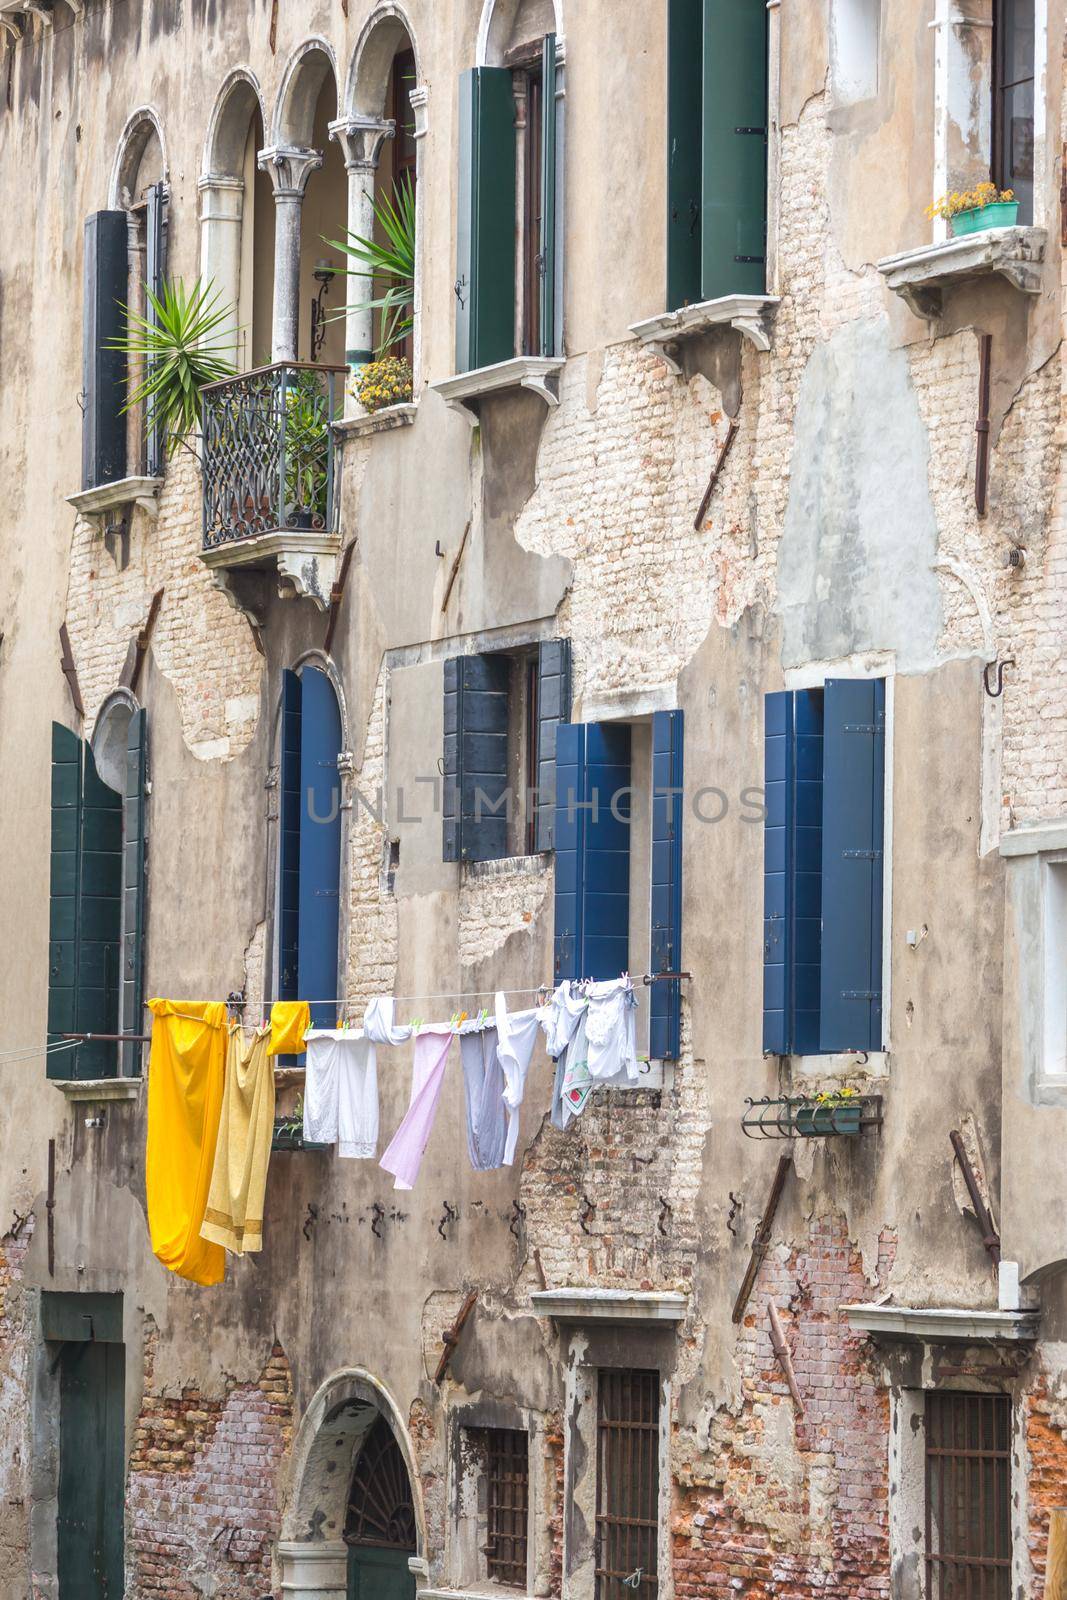 Clothes drying hanging outside in Venice Italy